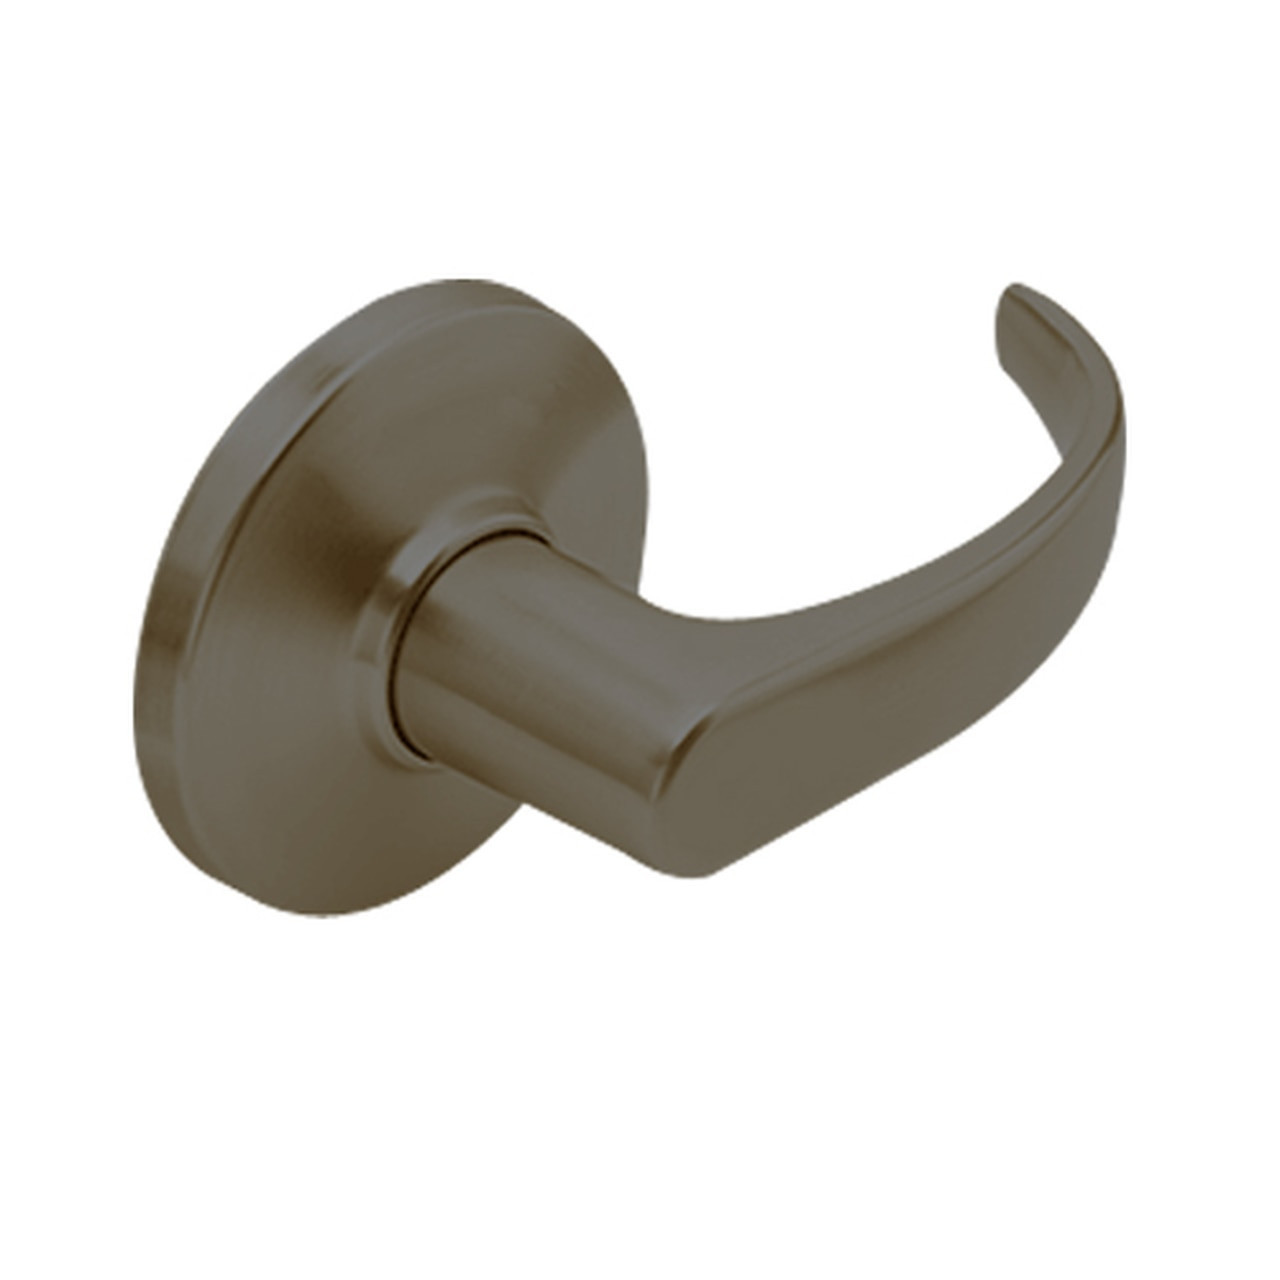 9K40Y14DSTK613LM Best 9K Series Exit Heavy Duty Cylindrical Lever Locks in Oil Rubbed Bronze